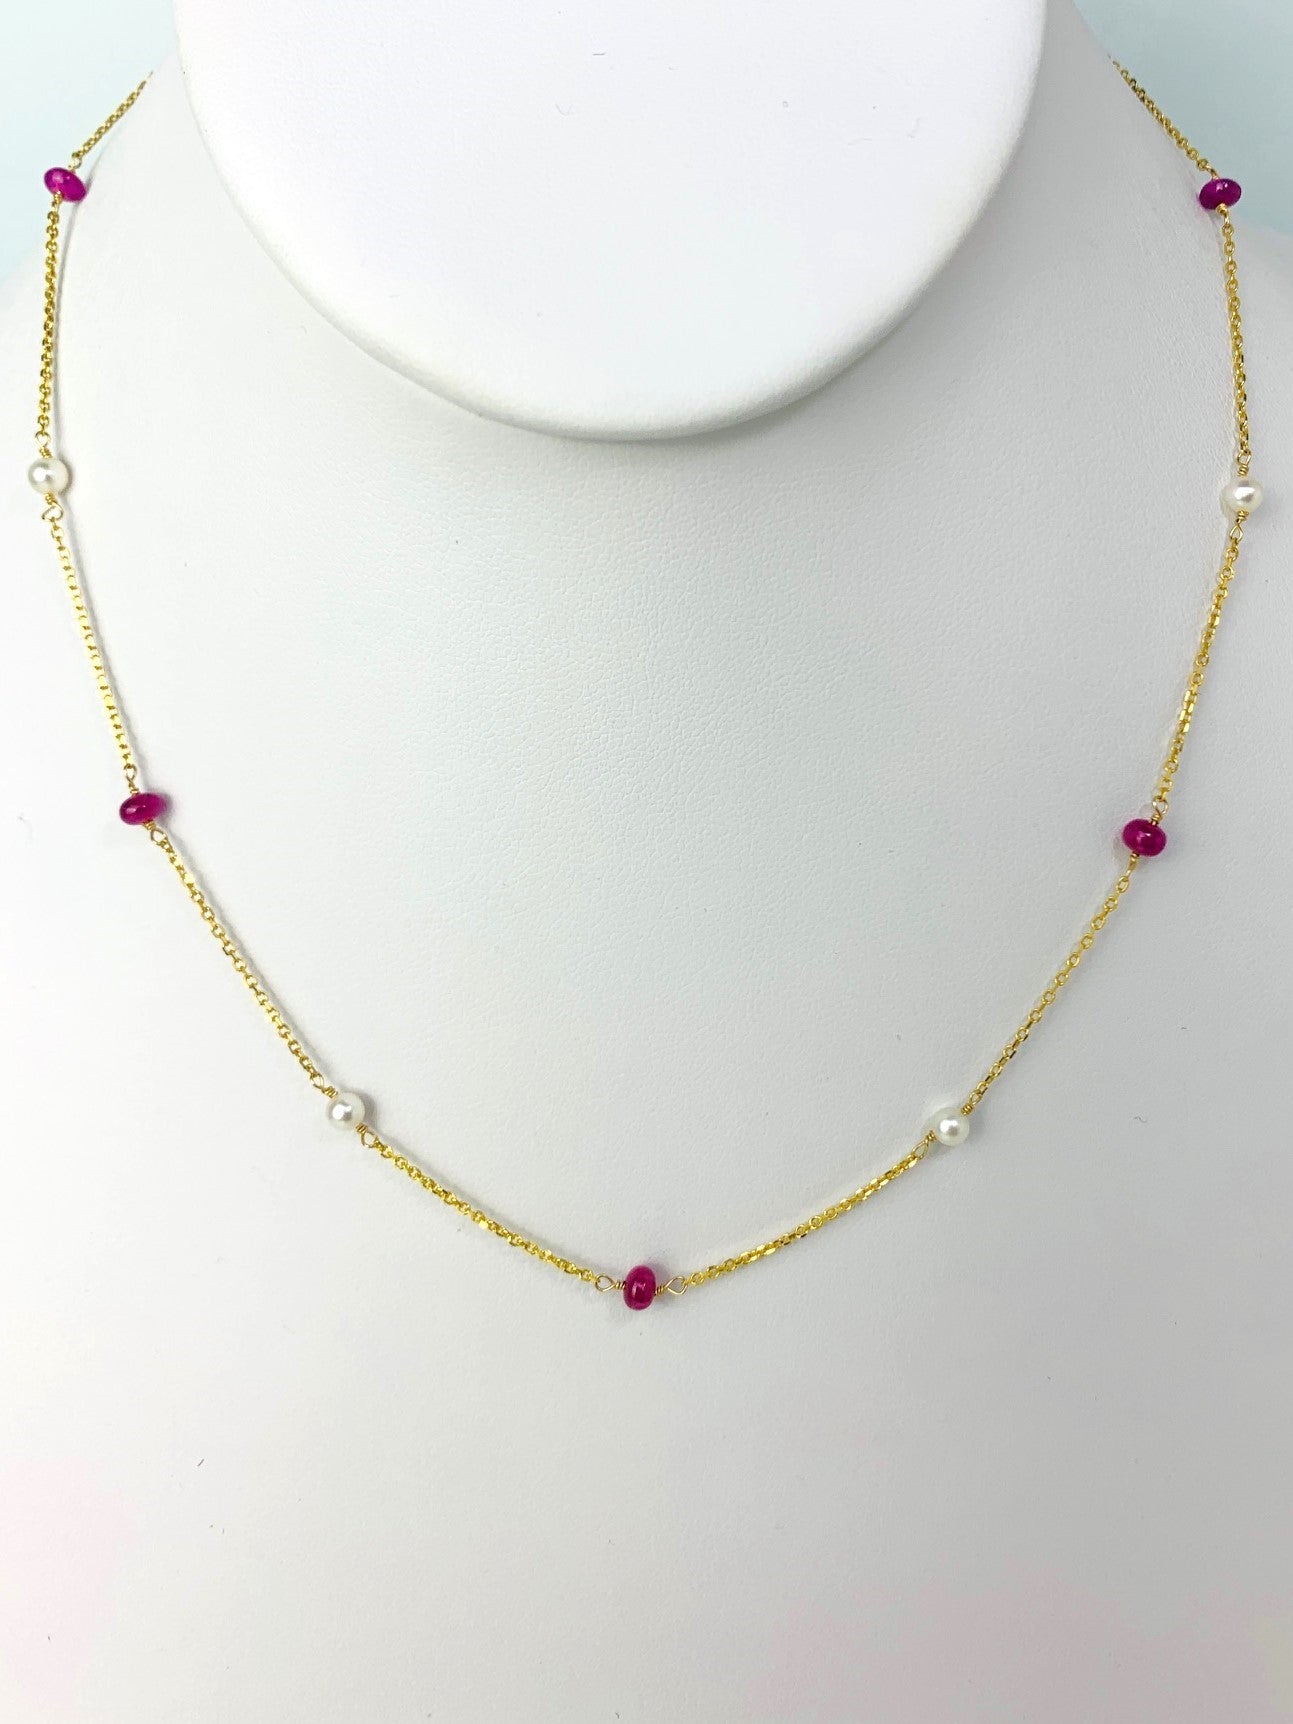 ruby smooth rondelle beads and round white freshwater pearls in stations around a yellow gold chain